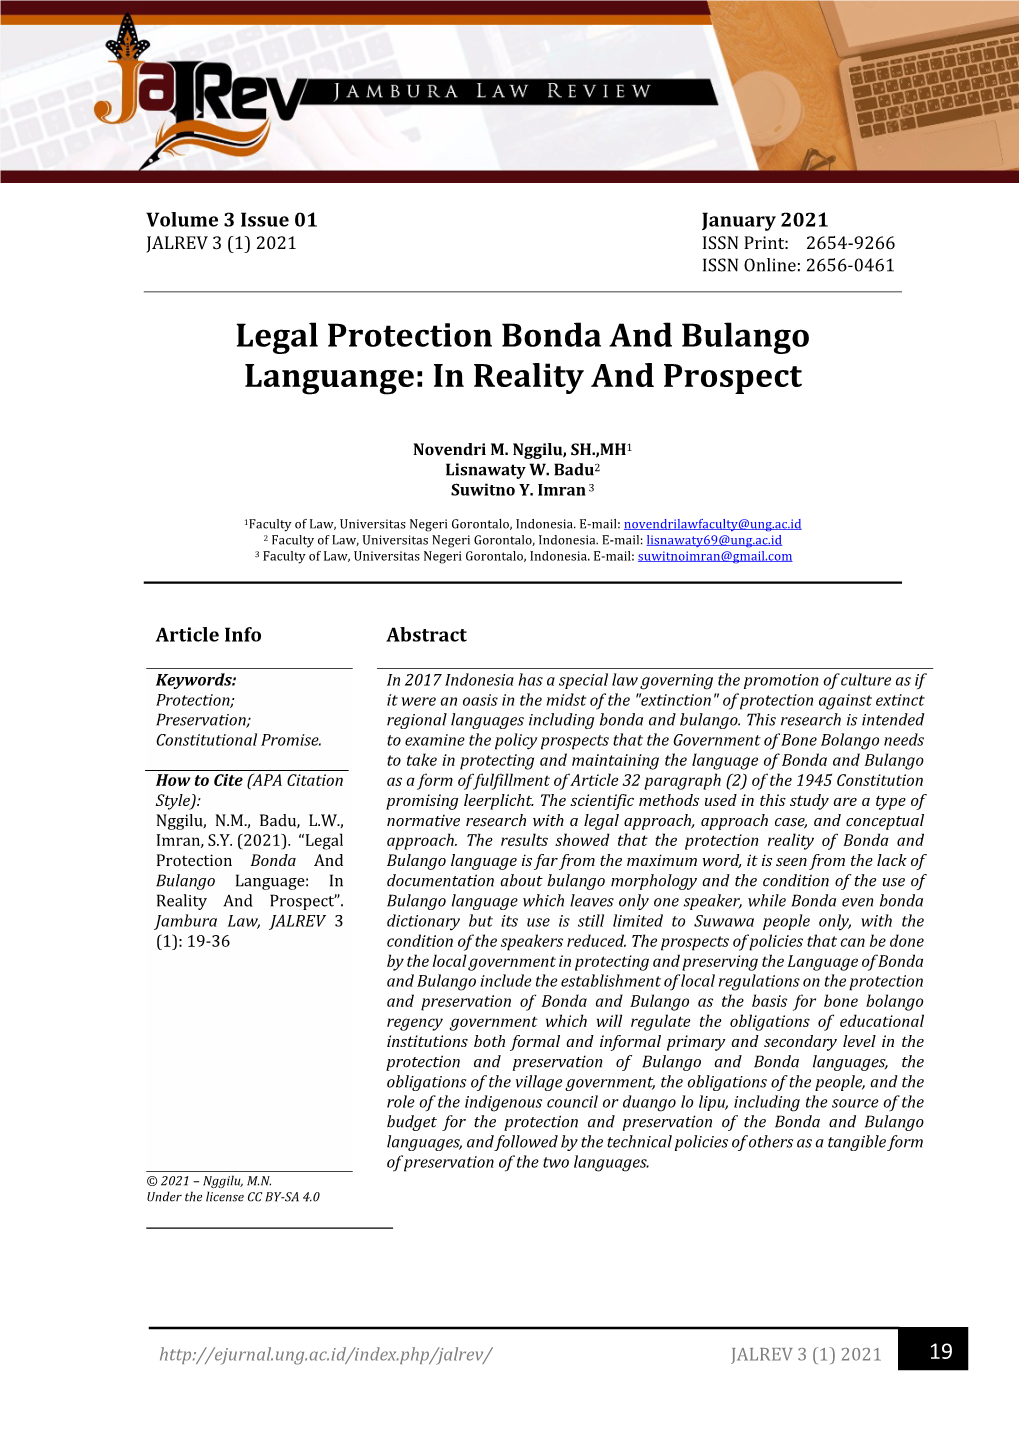 Legal Protection Bonda and Bulango Languange: in Reality and Prospect